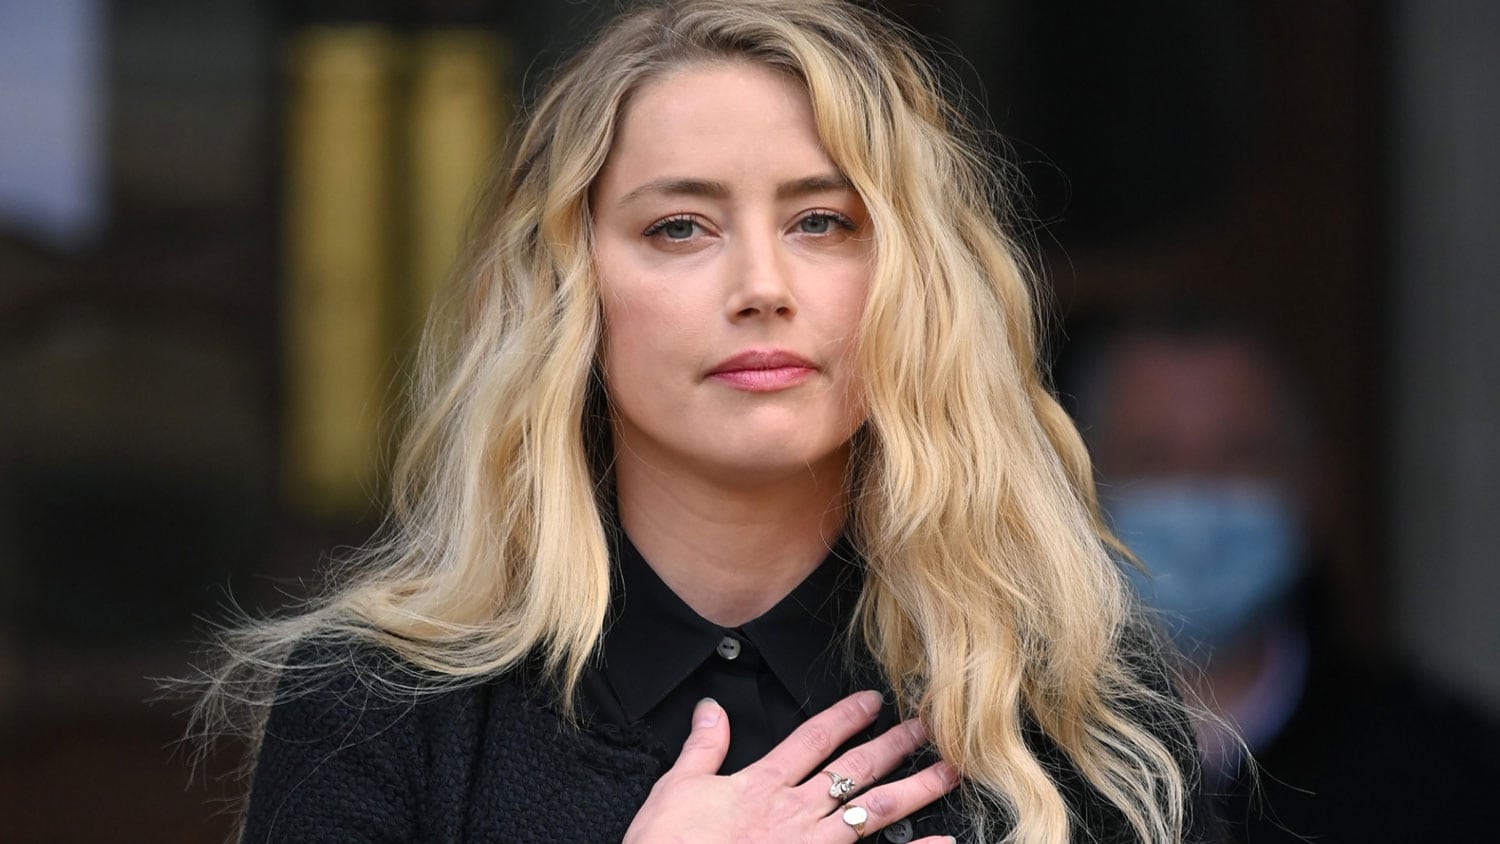 Heard Porn Video - Amber Heard Reportedly Offered $10M To Star In An Adult Movie